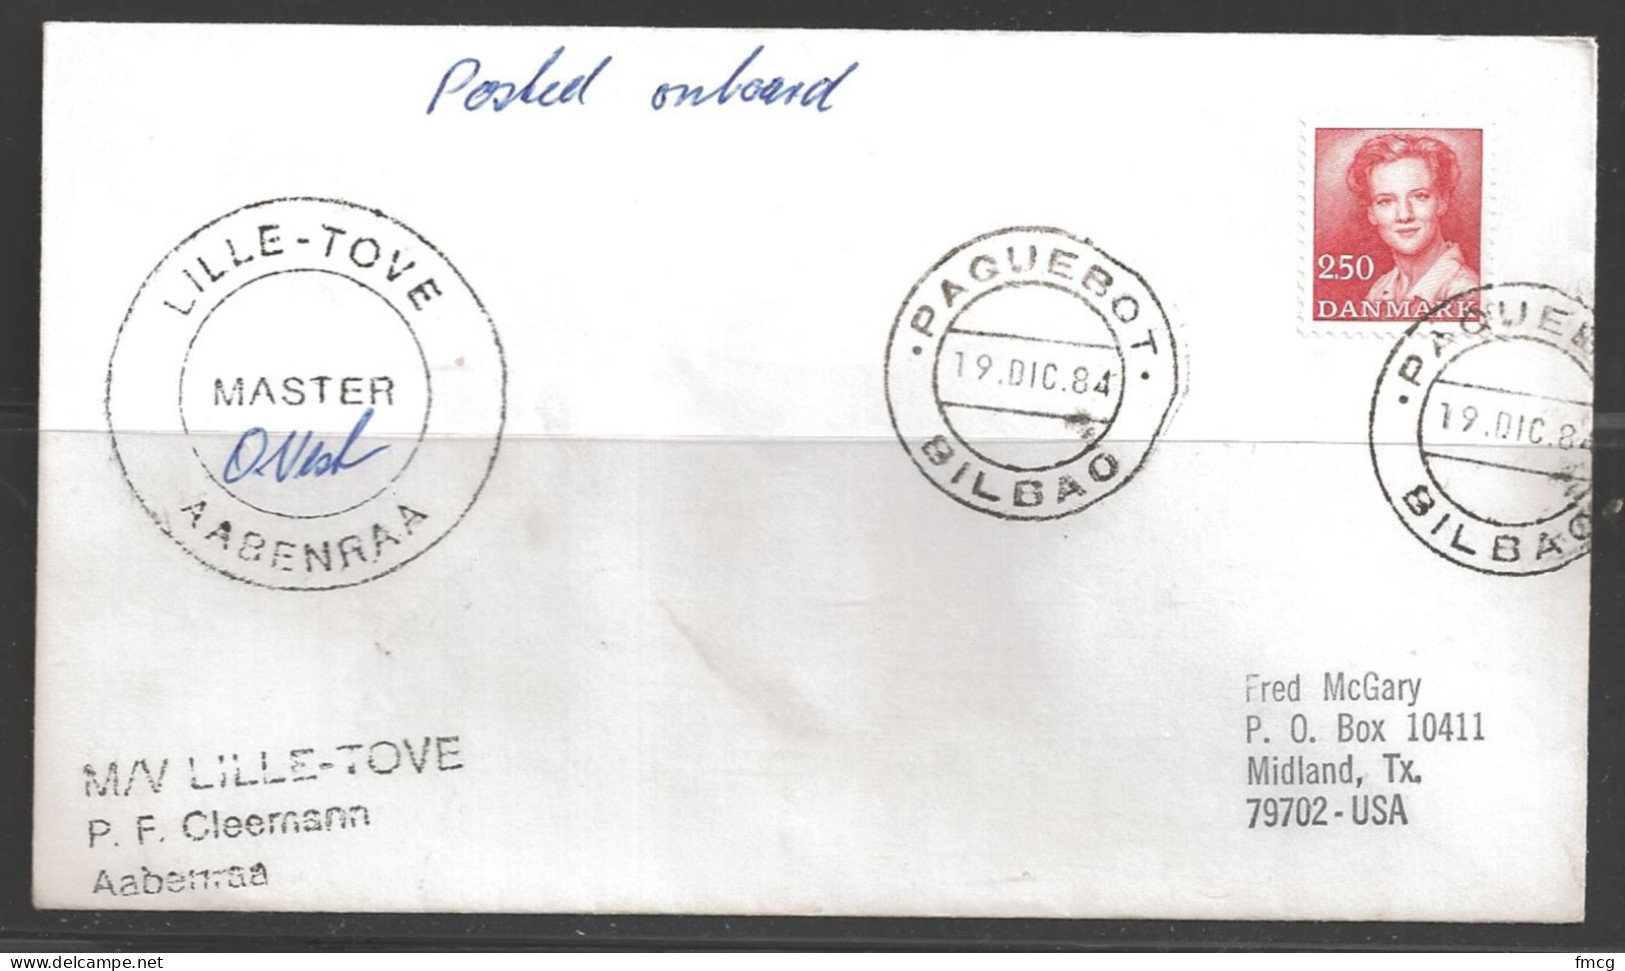 1984 Paquebot Cover, Denmark Stamp Used At Bilbao, Spain - Lettres & Documents